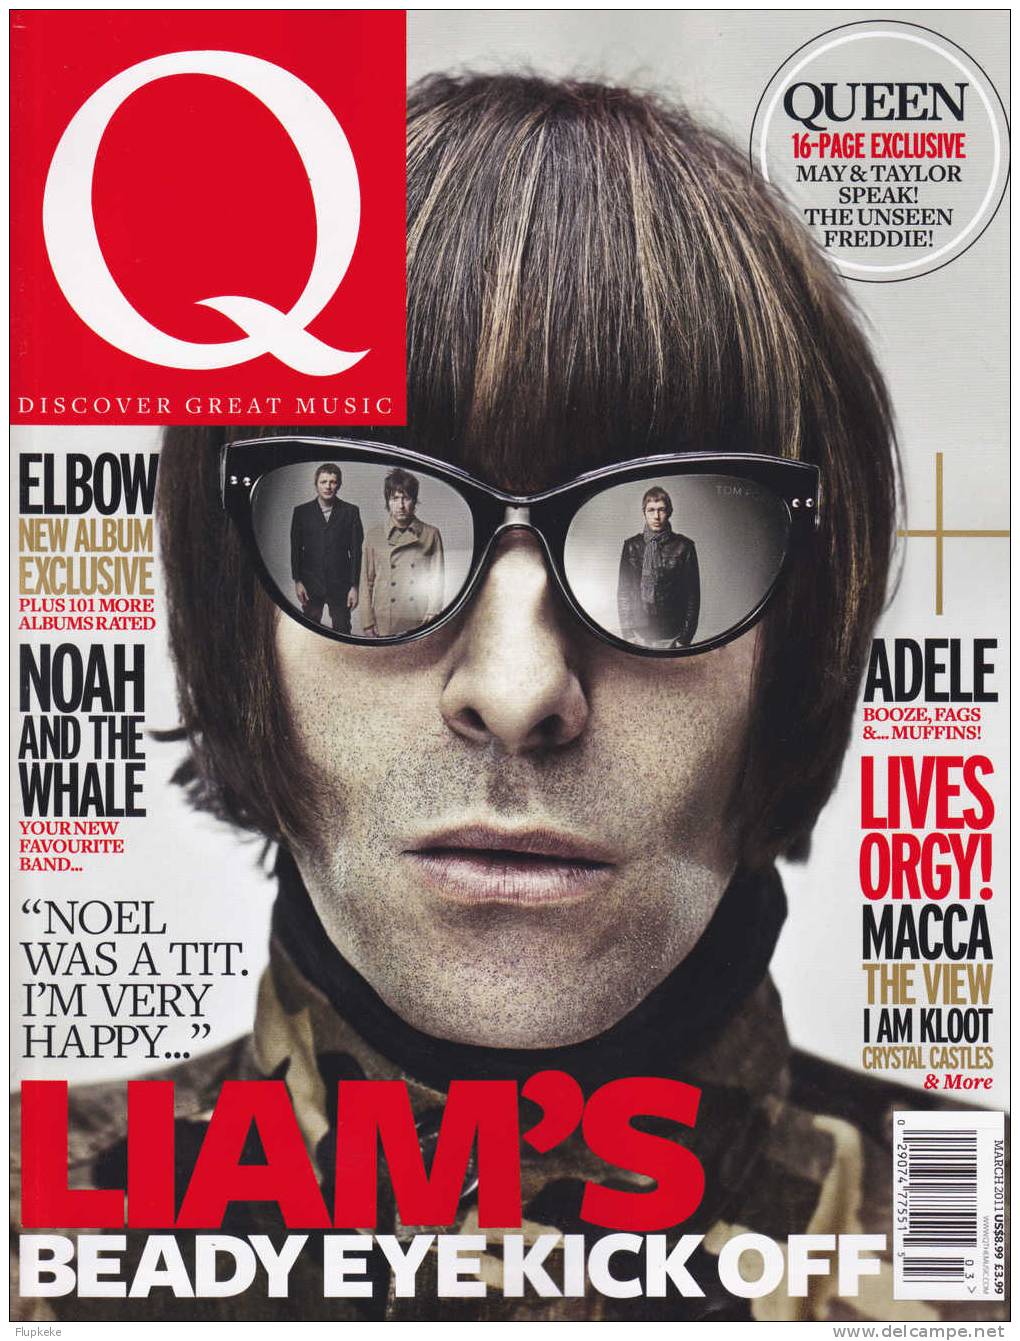 Q 296 March 2011 Liam´s Beady Eye Kick Off Queen 16 Page Exclusive - Divertissement